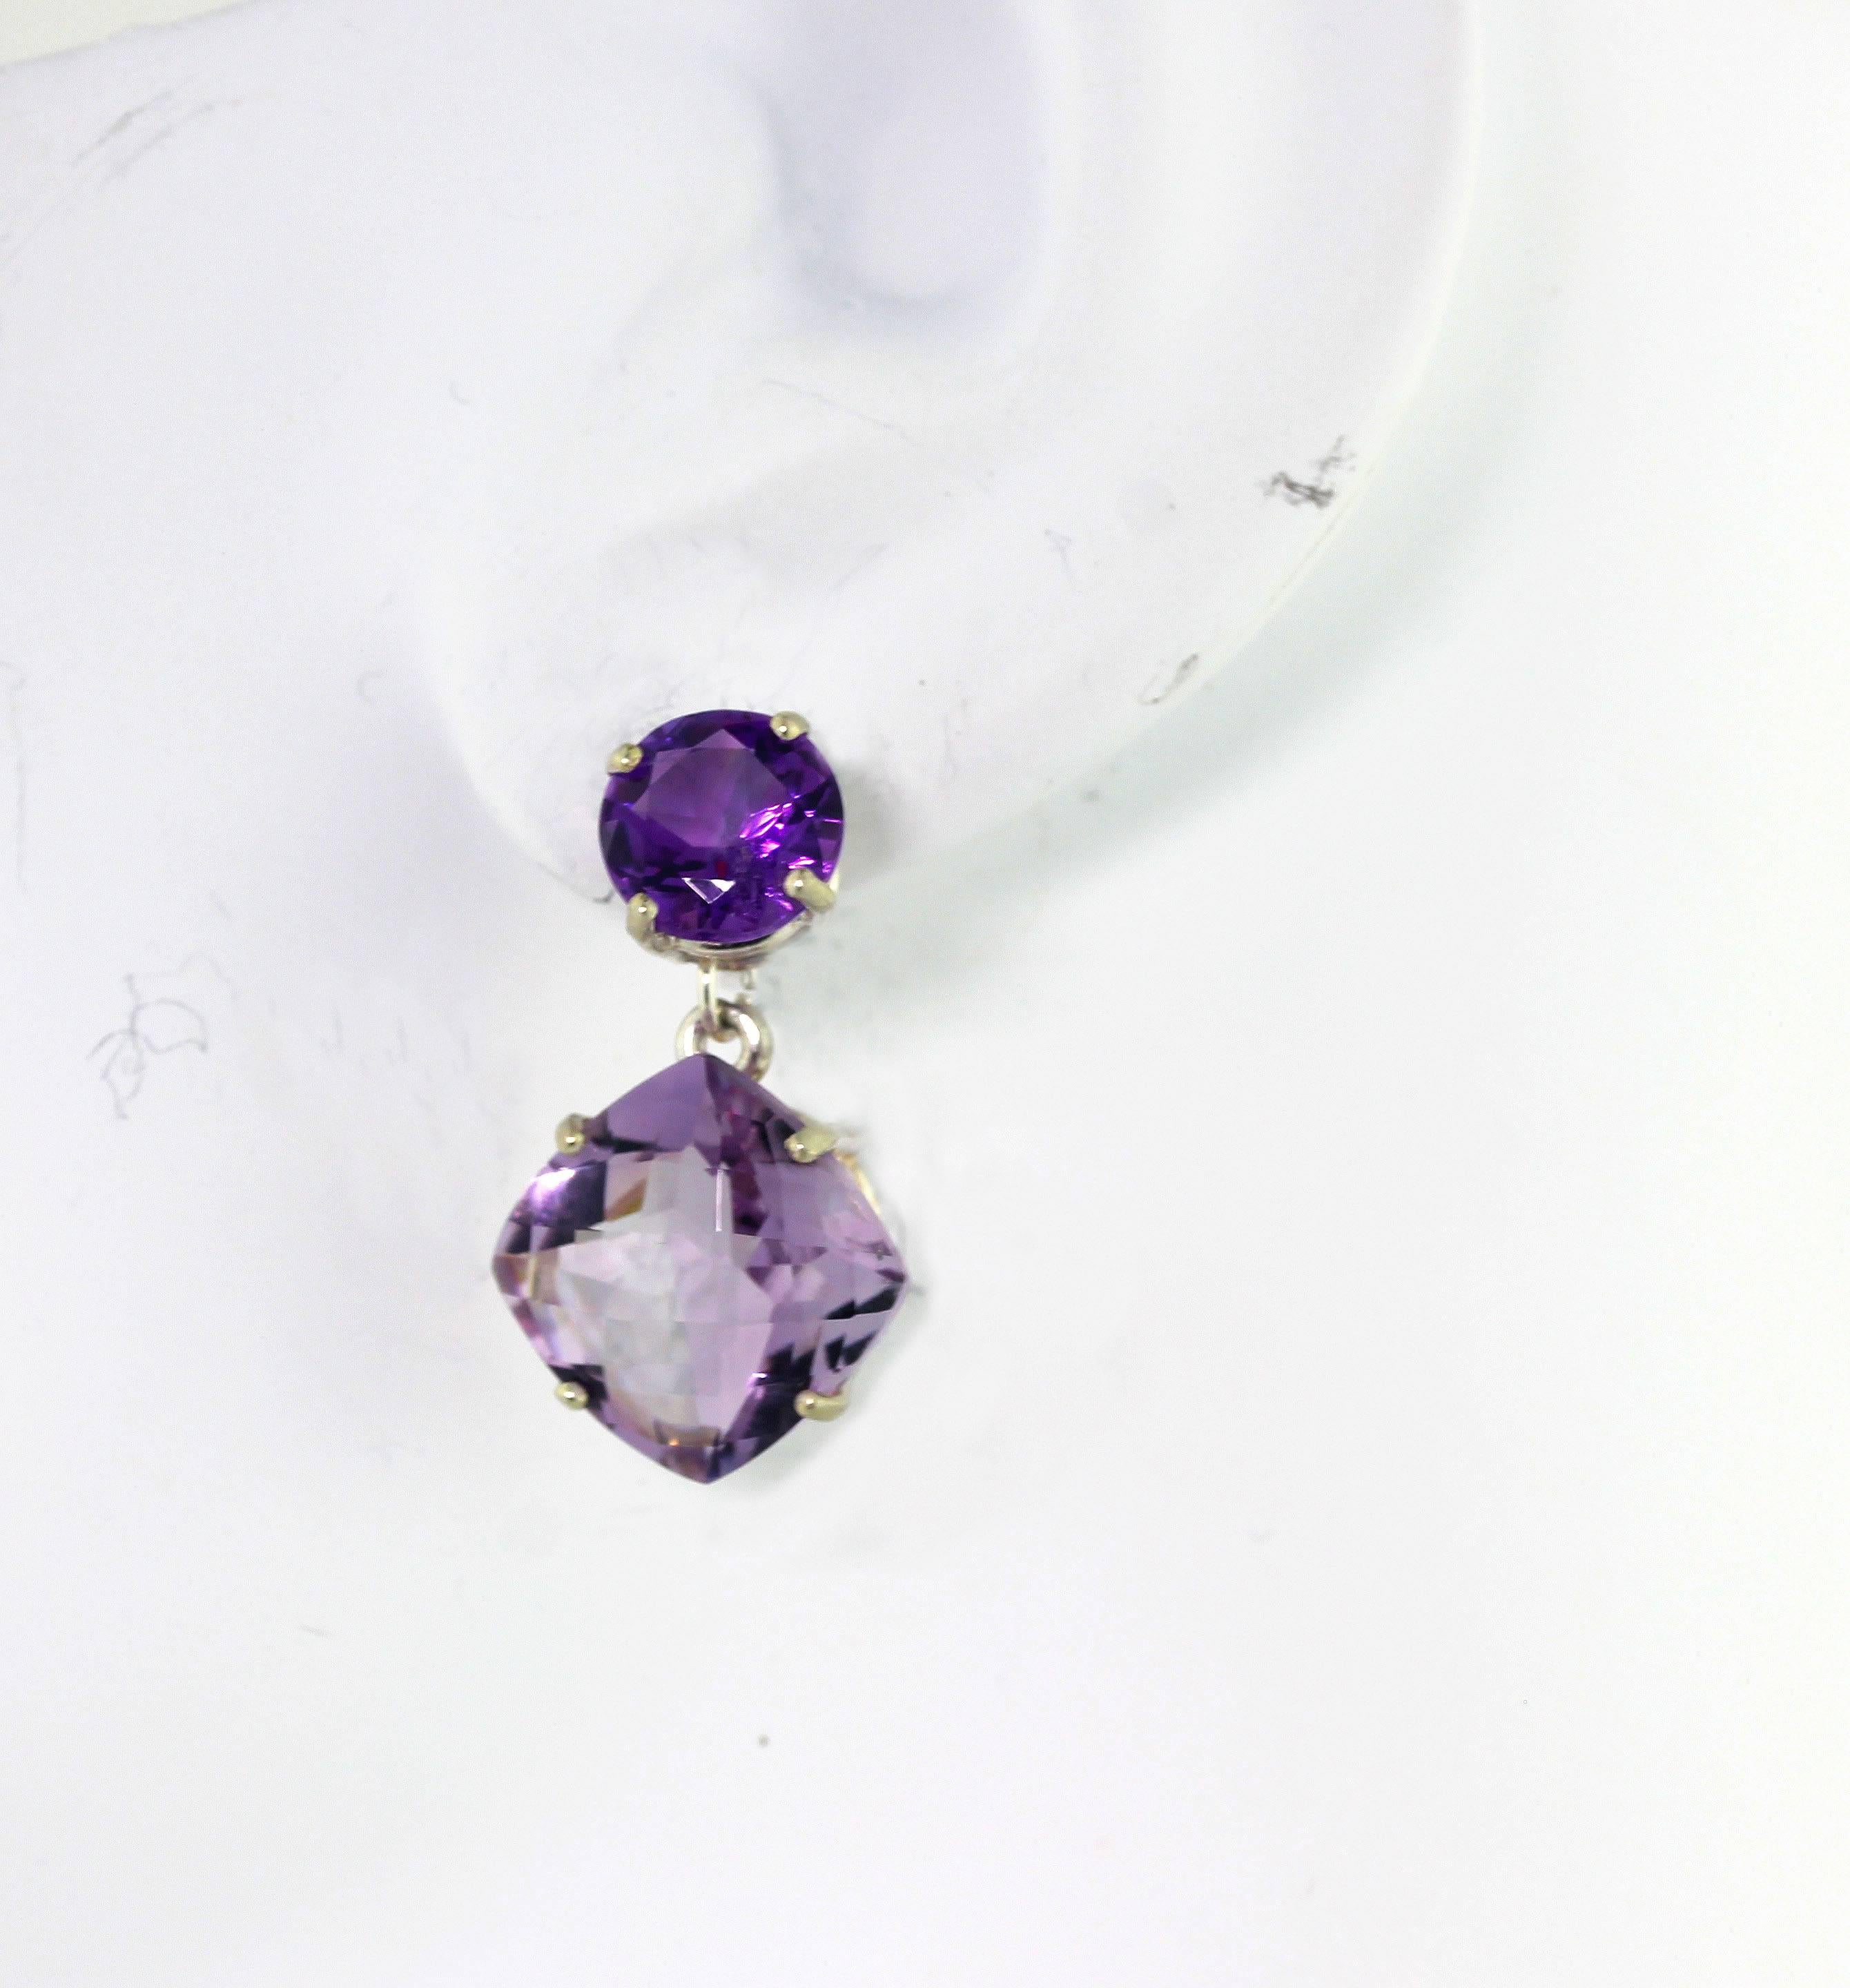 9.8 carats of brilliant pink flashing round purple Amethysts (8 mm) dangle these lovely sparkling 11.9 carats of checkerboard cut cushion shaped Rose of France Amethysts (12 mm x 12 mm) set in Sterling Silver stud earrings.   The earrings measure